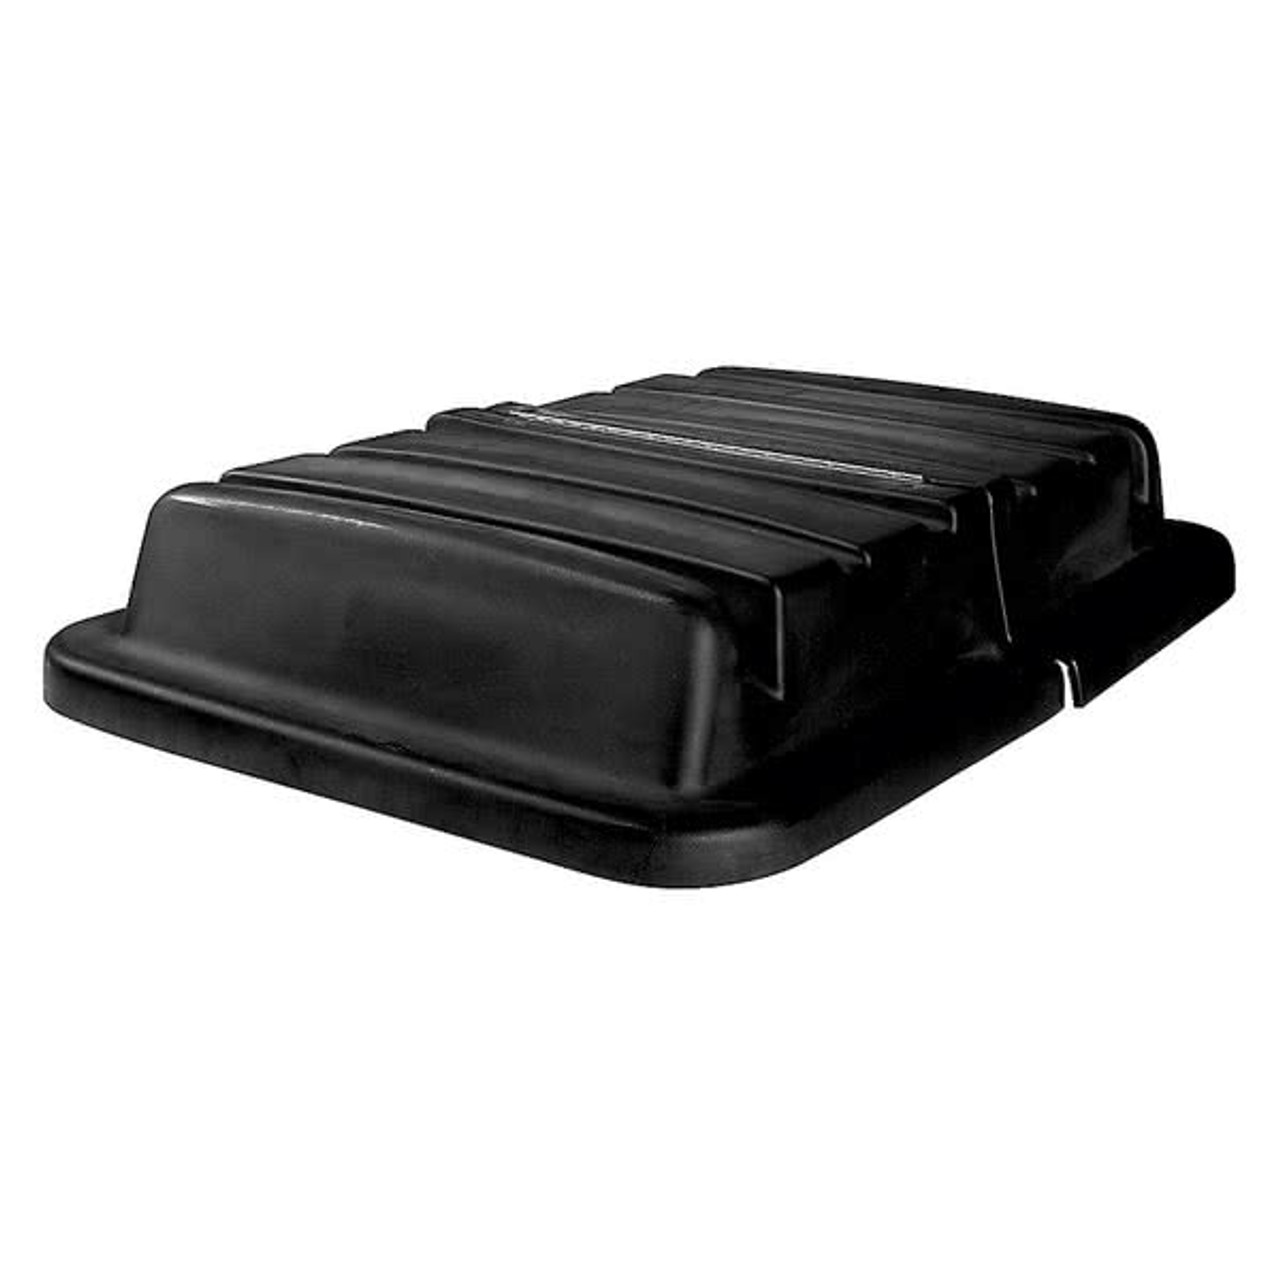 Lid for Cube Truck 0.6m3, Rubbermaid